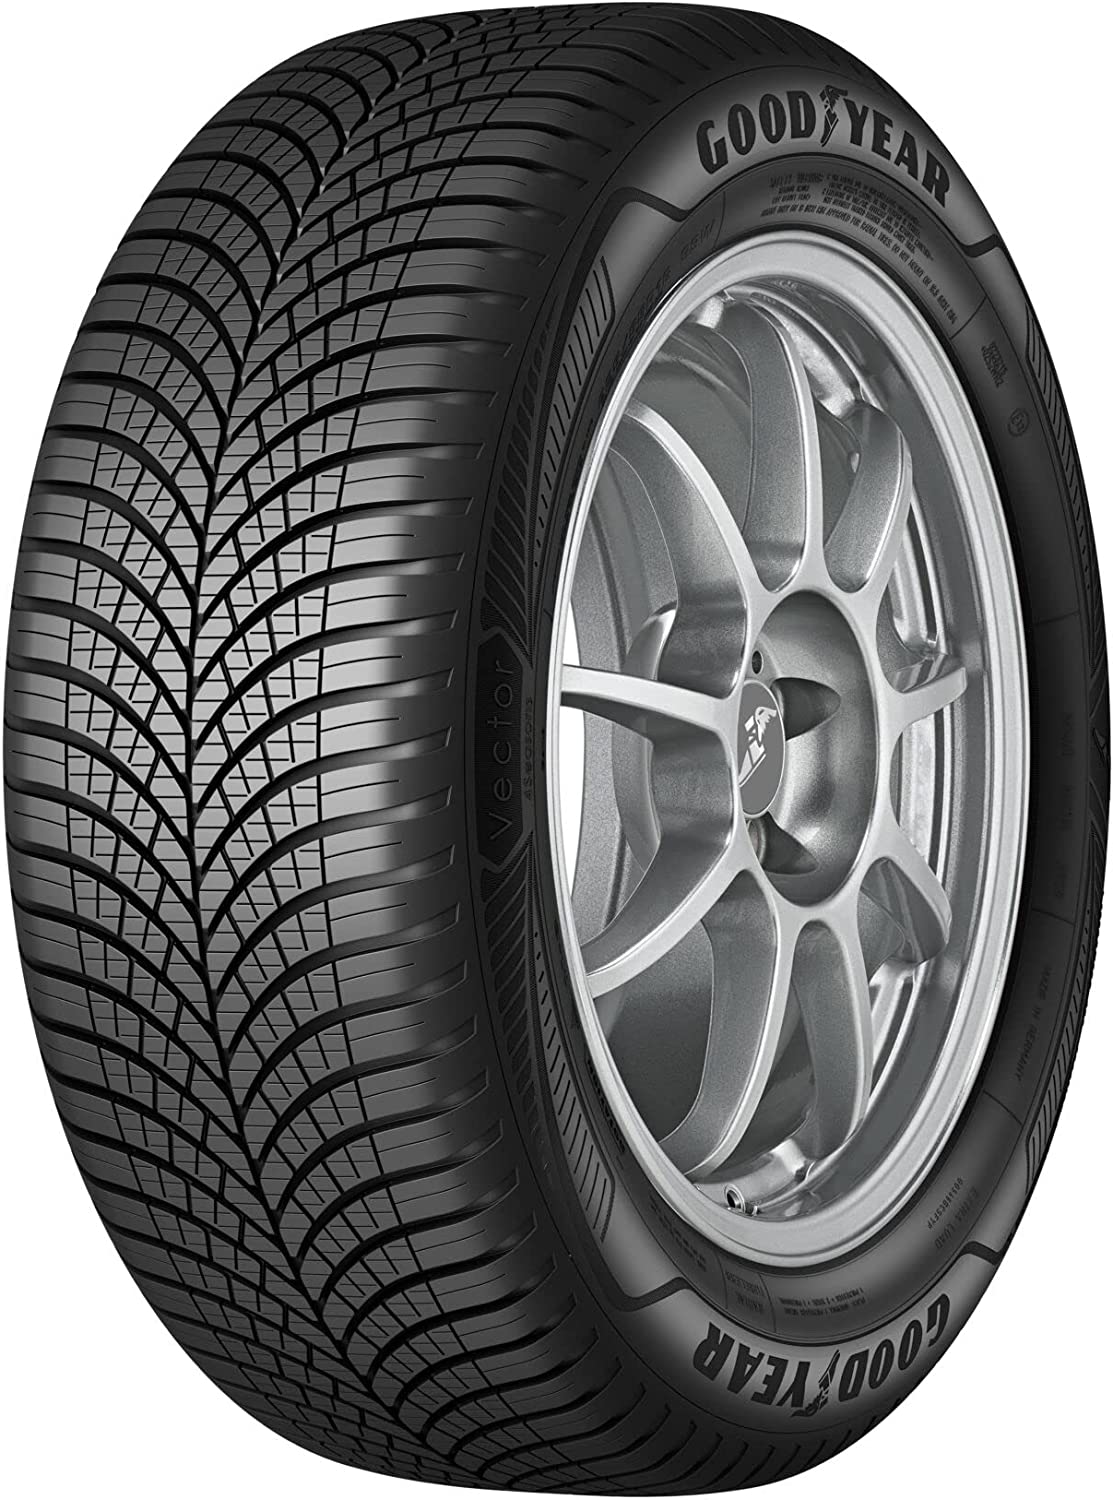 Gomme Nuove Goodyear 225/55 R17 101Y VECTOR 4S G3 XL M+S pneumatici nuovi All Season